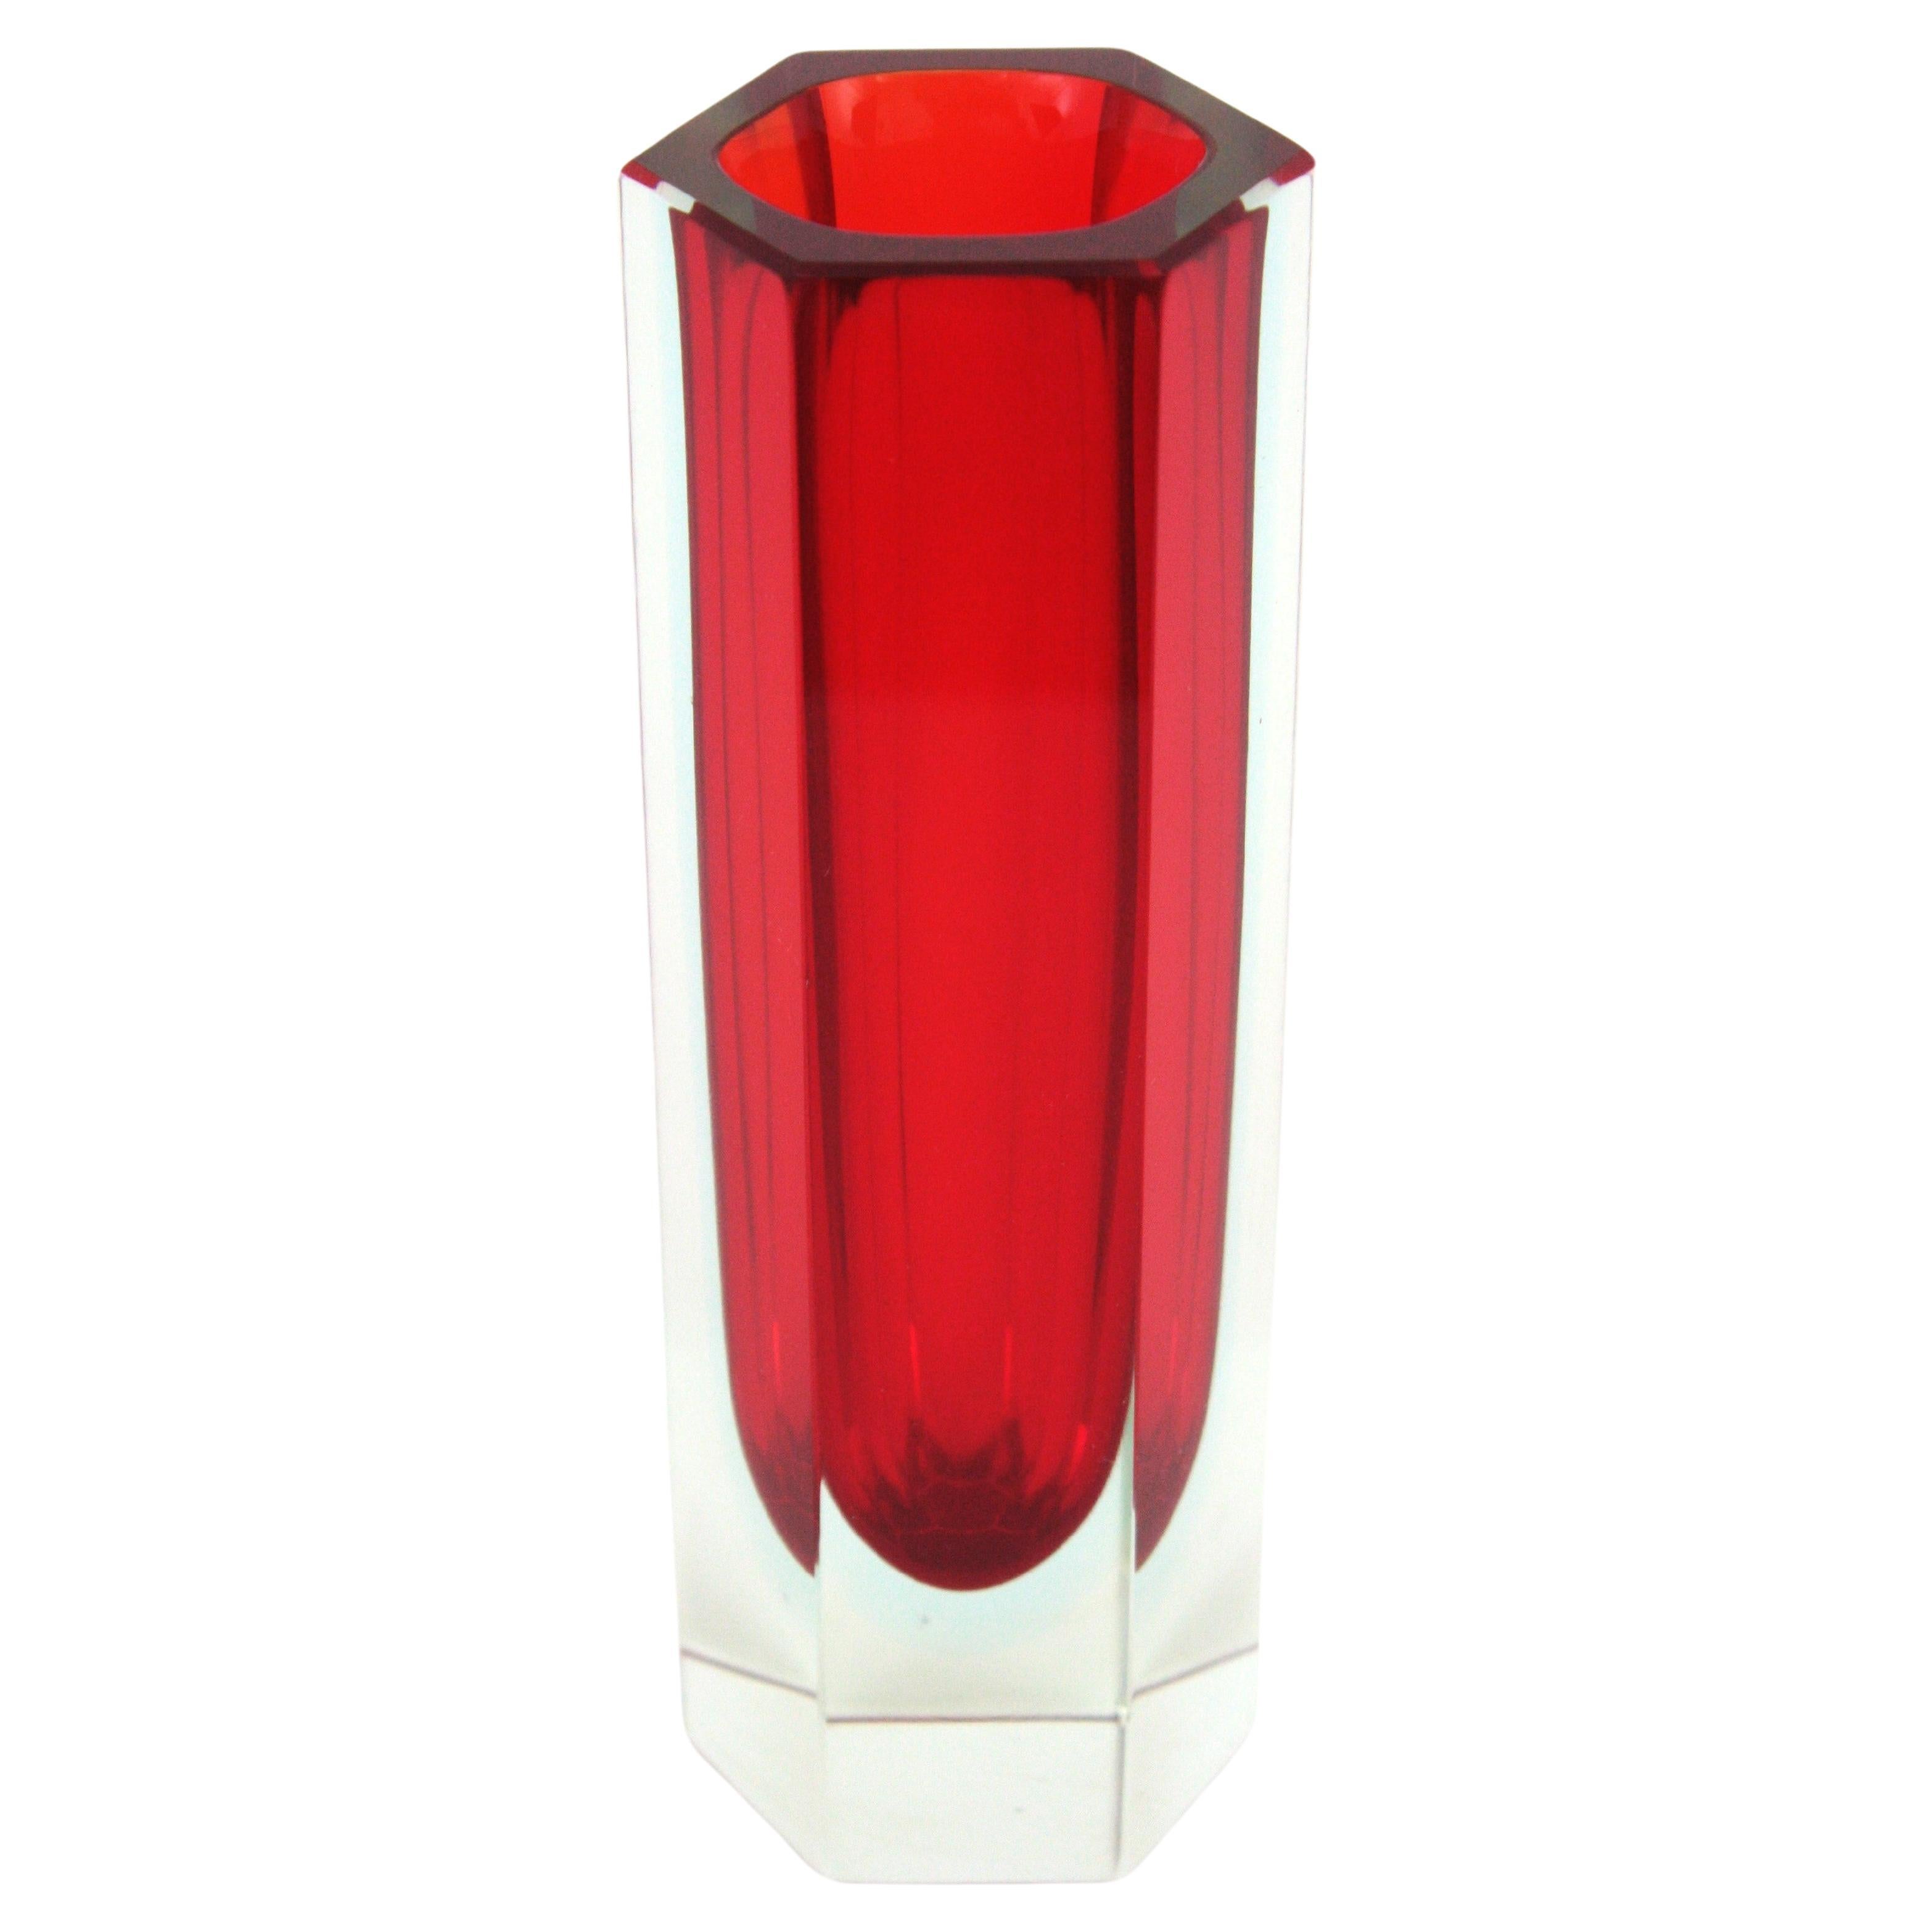 A cool midcentury red and clear Sommerso glass hexagonal faceted vase. Attributed to Mandruzzato, Italy, 1960s.
Red glass with a layer of soft blue glass summerged into clear glass using the Sommerso technique.
This eye-catching vase will be pretty